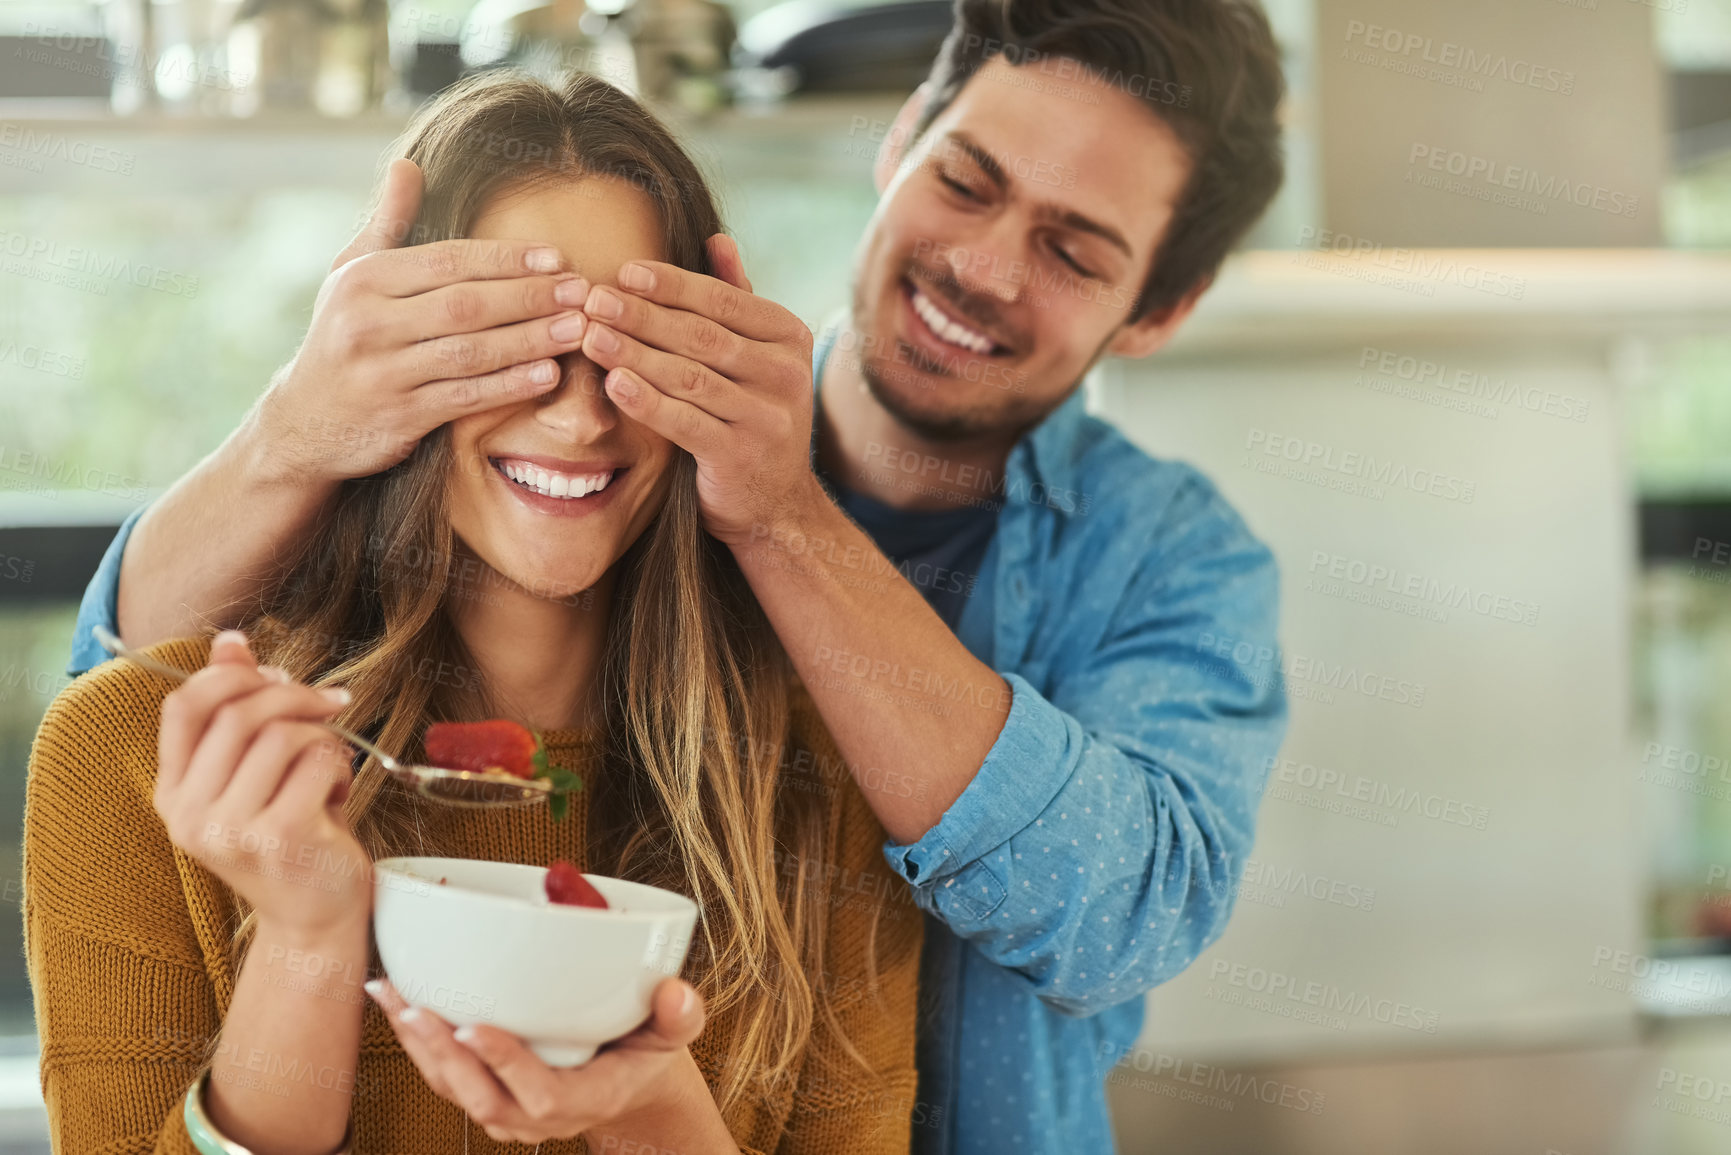 Buy stock photo Shot of an affectionate young man covering his girlfriend's eyes while she eats breakfast in their kitchen